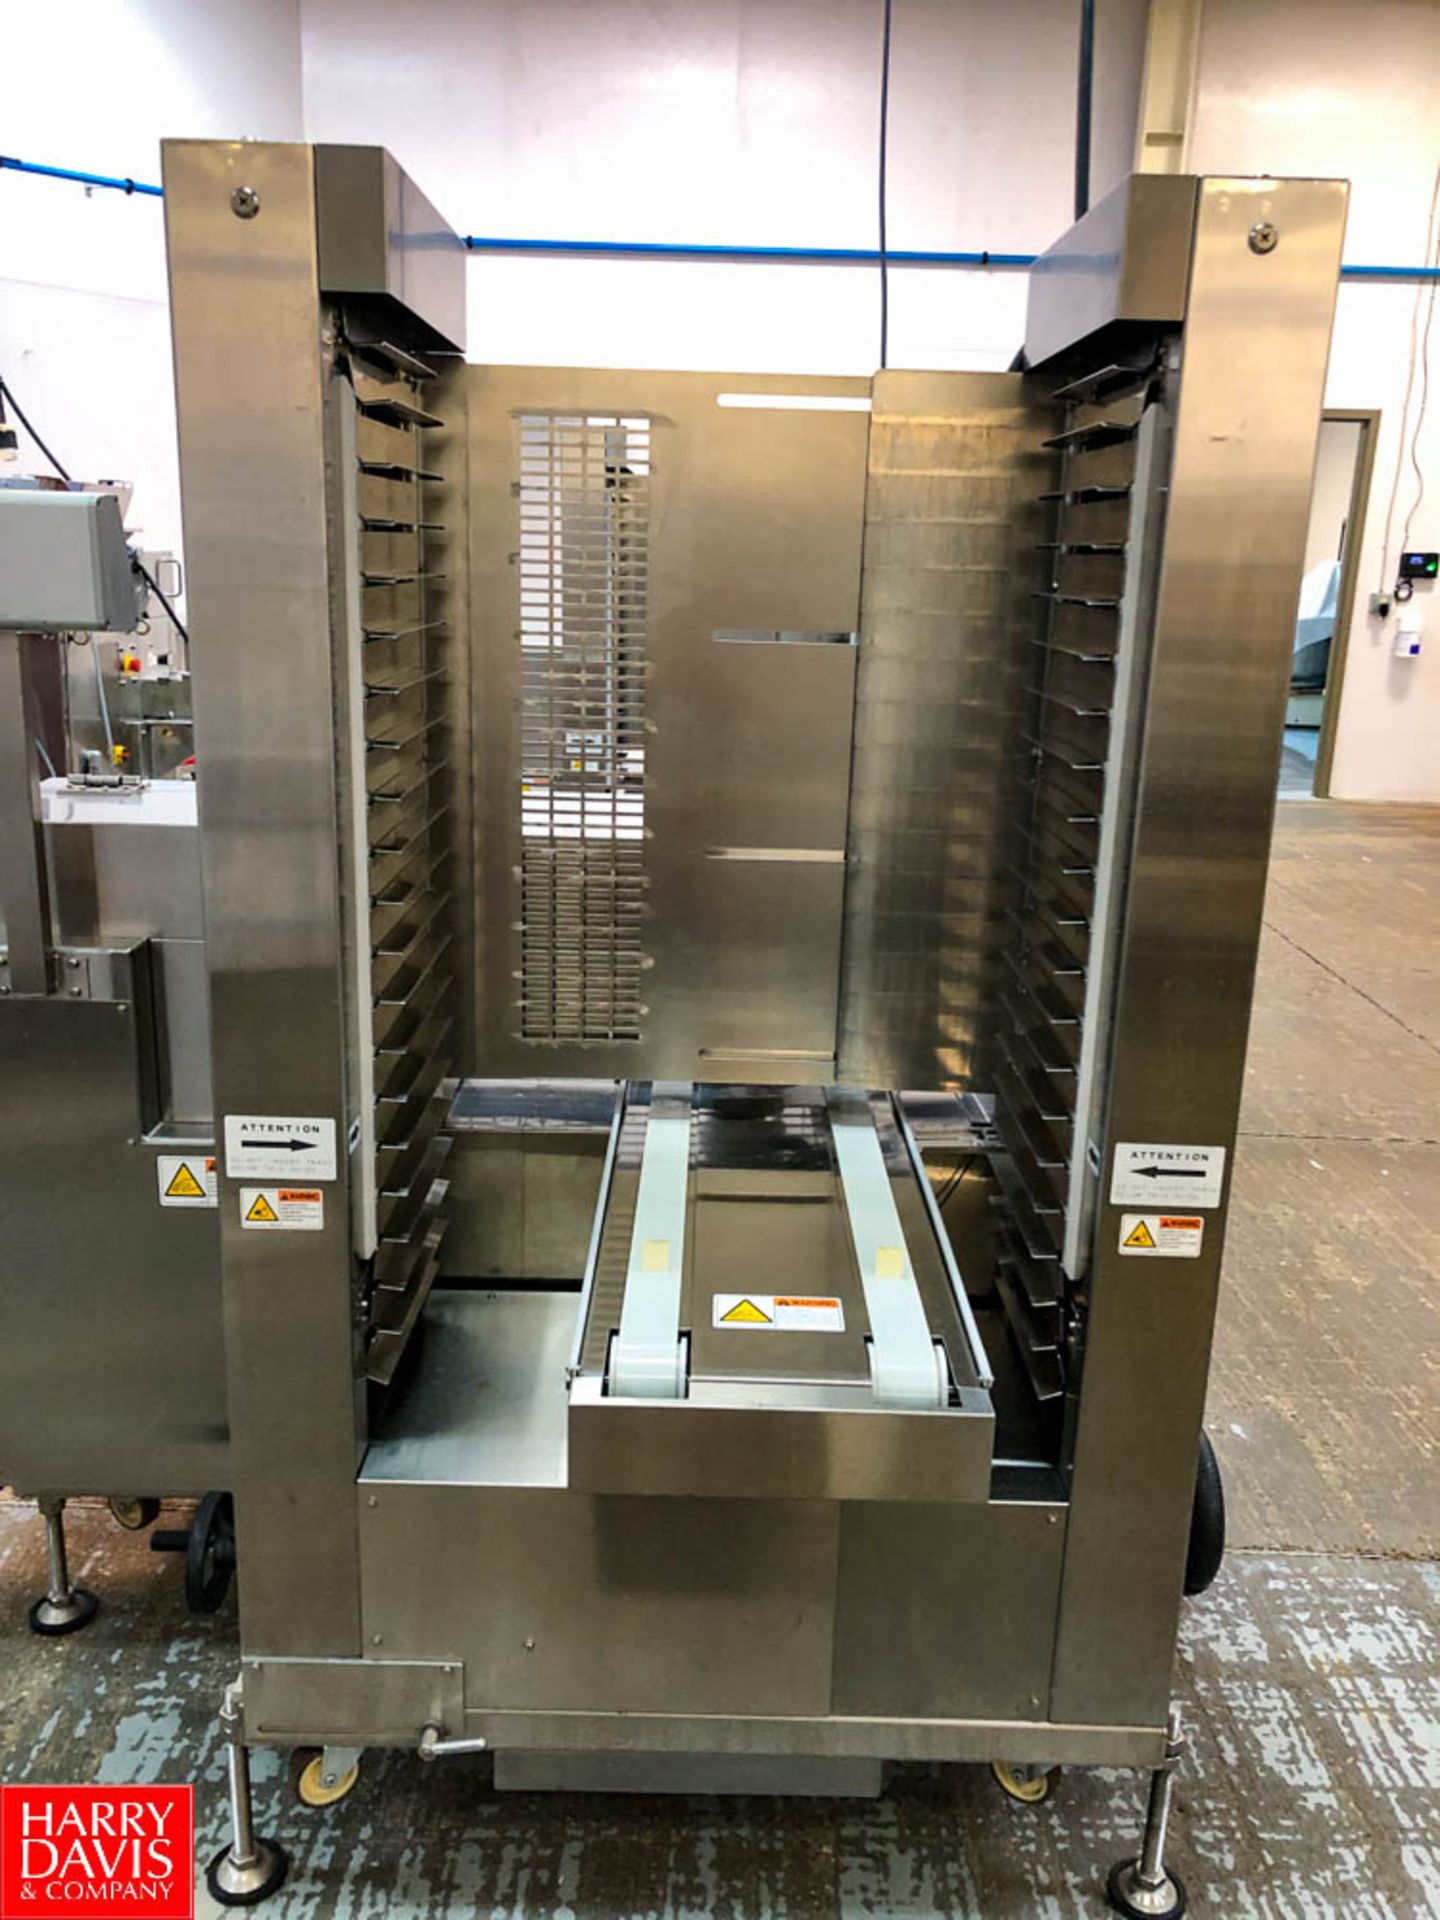 2018 Rheon Set Panner KP302; Tray Size: 660 mm, Up to 60 pcs/min, S/N: 00190 With Belting Rigging - Image 5 of 5